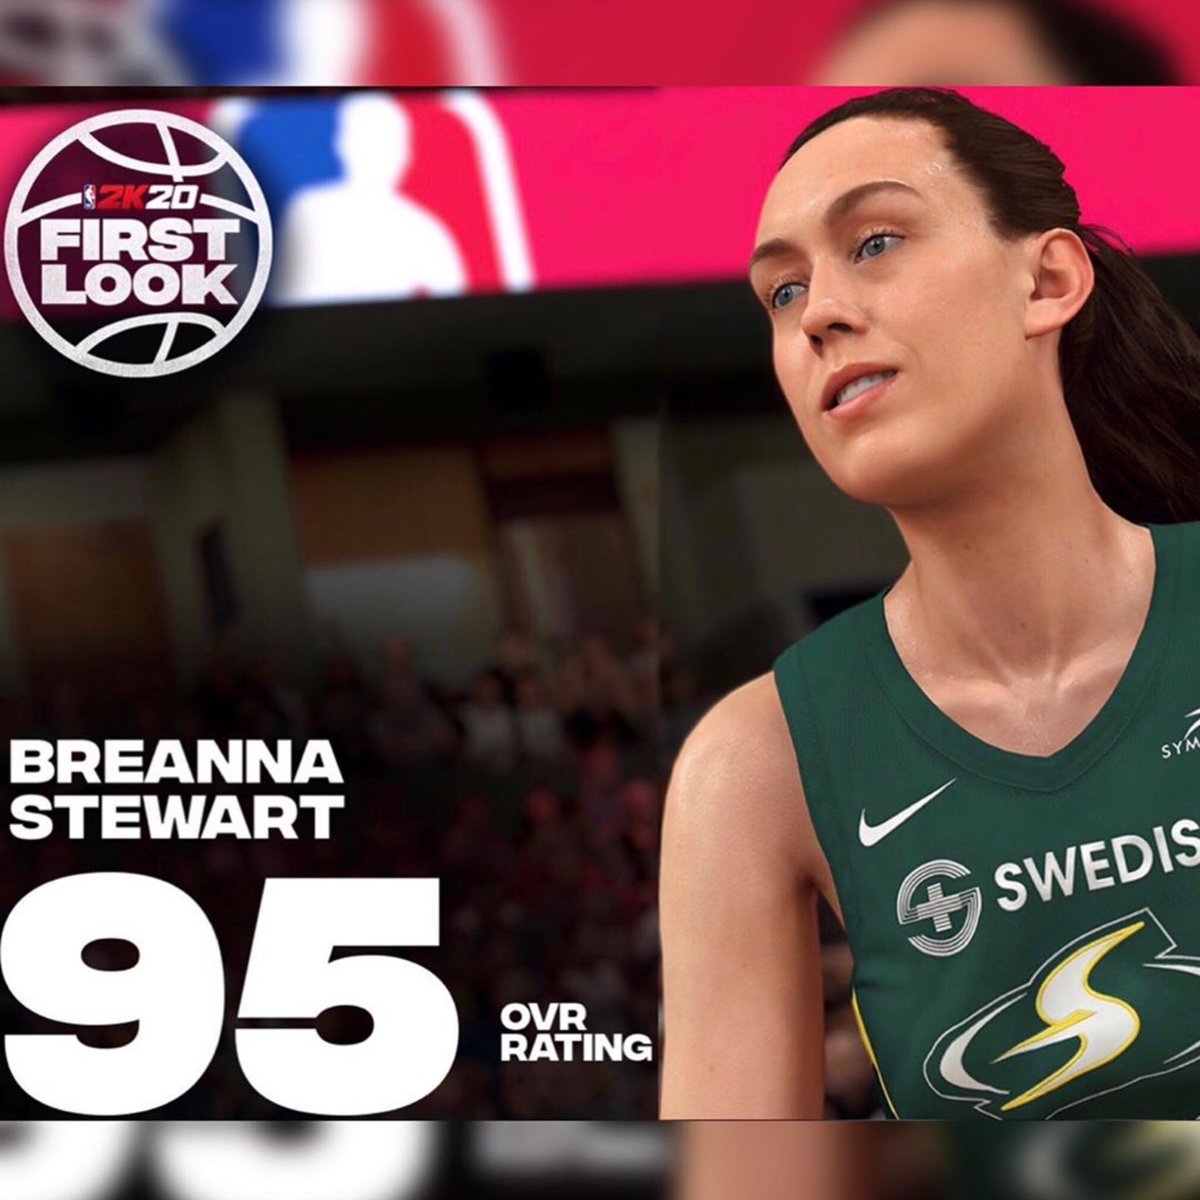 BREAKING: Breanna Stewart’s 2k rating and image has been released. 